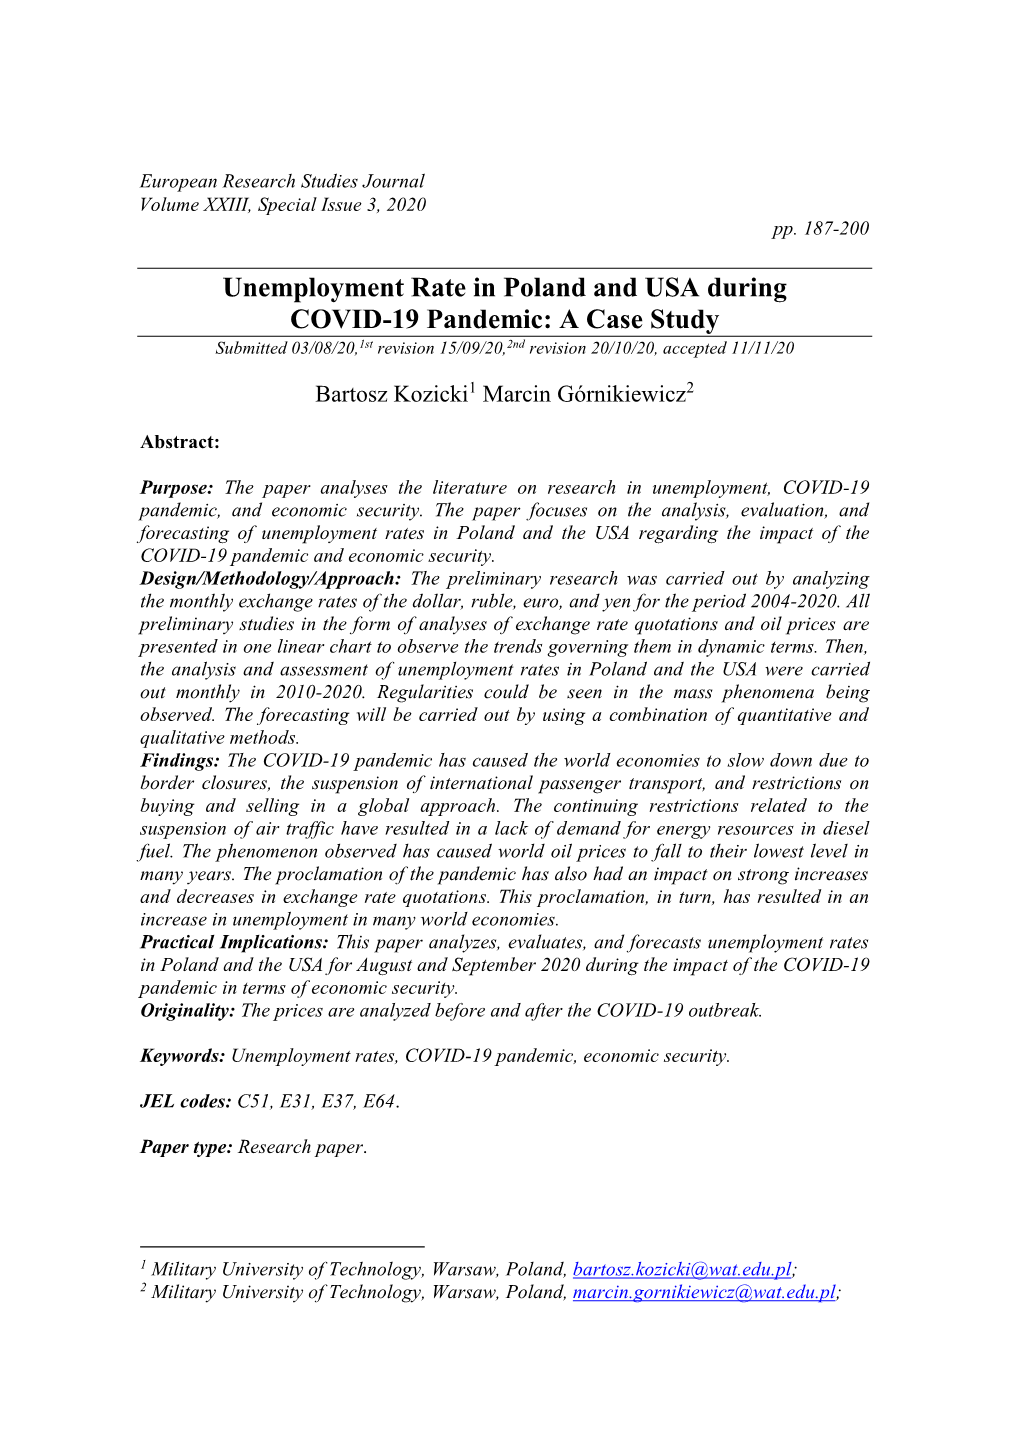 Unemployment Rate in Poland and USA During COVID-19 Pandemic: a Case Study Submitted 03/08/20,1St Revision 15/09/20,2Nd Revision 20/10/20, Accepted 11/11/20